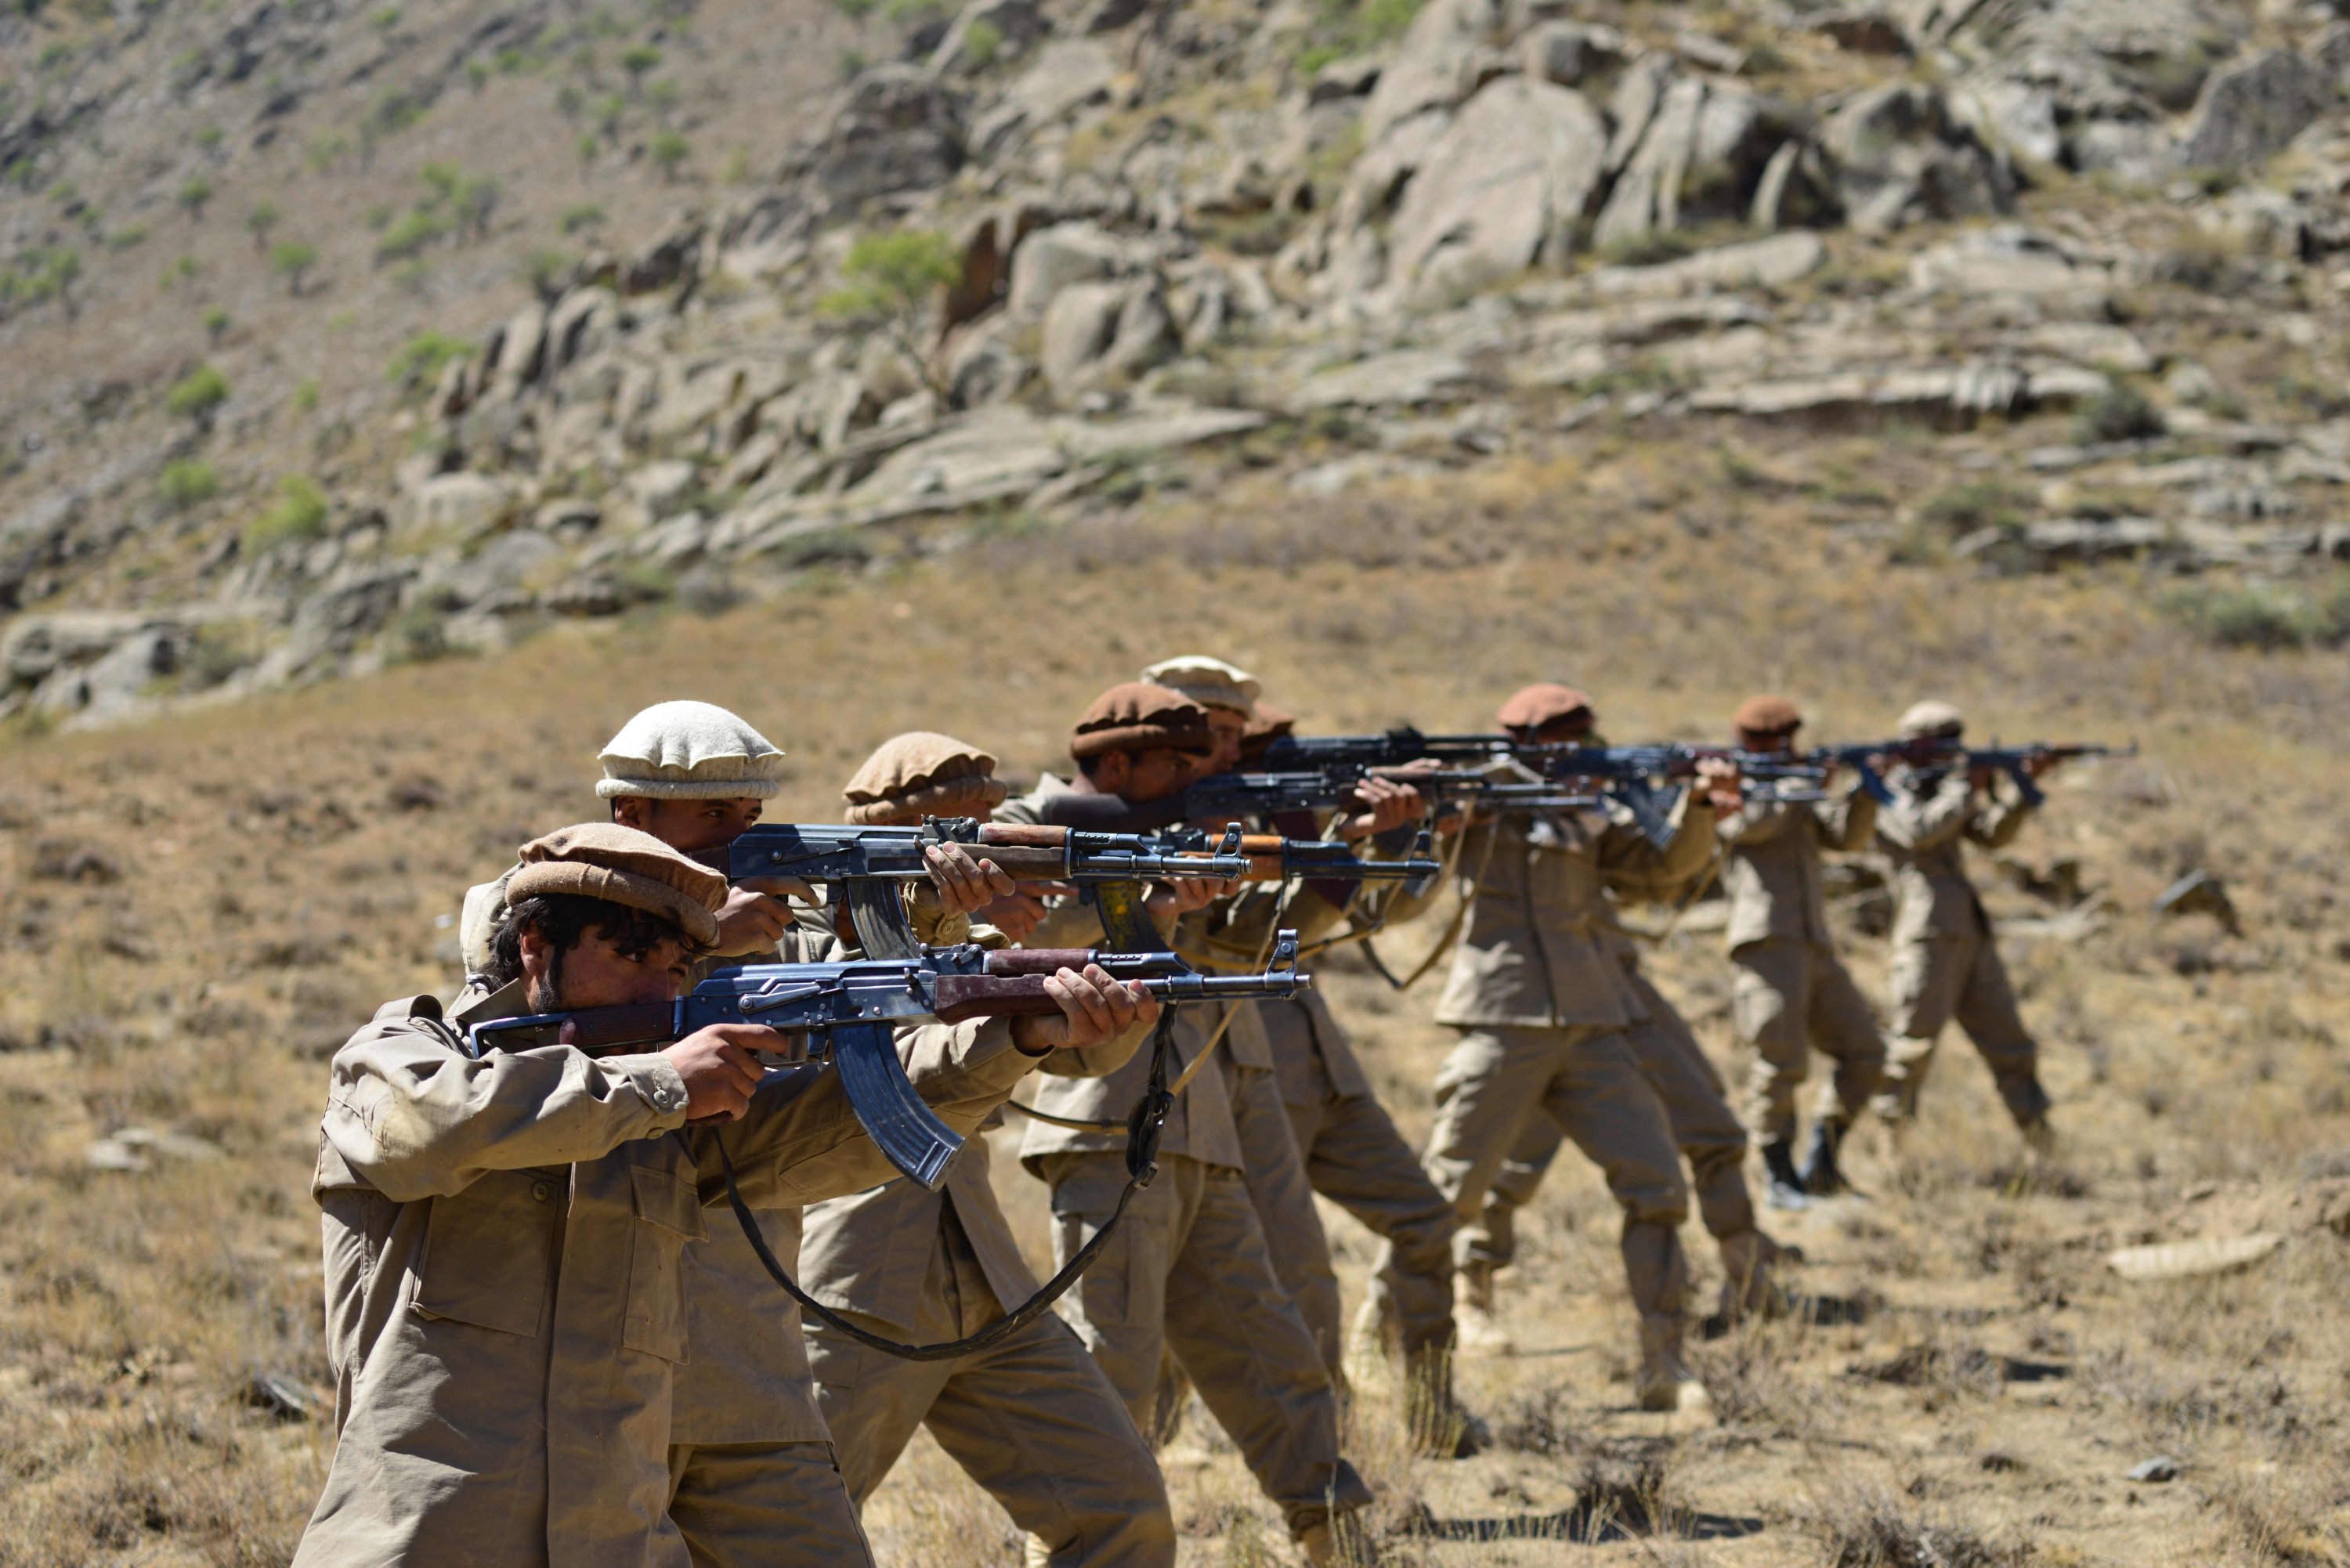 Afghan resistance movement and anti-Taliban uprising forces take part in military training at Malimah area of Dara district in Panjshir province, Afghanistan, Sept. 2, 2021, as the valley remains the last major holdout of anti-Taliban forces. (AFP Photo)